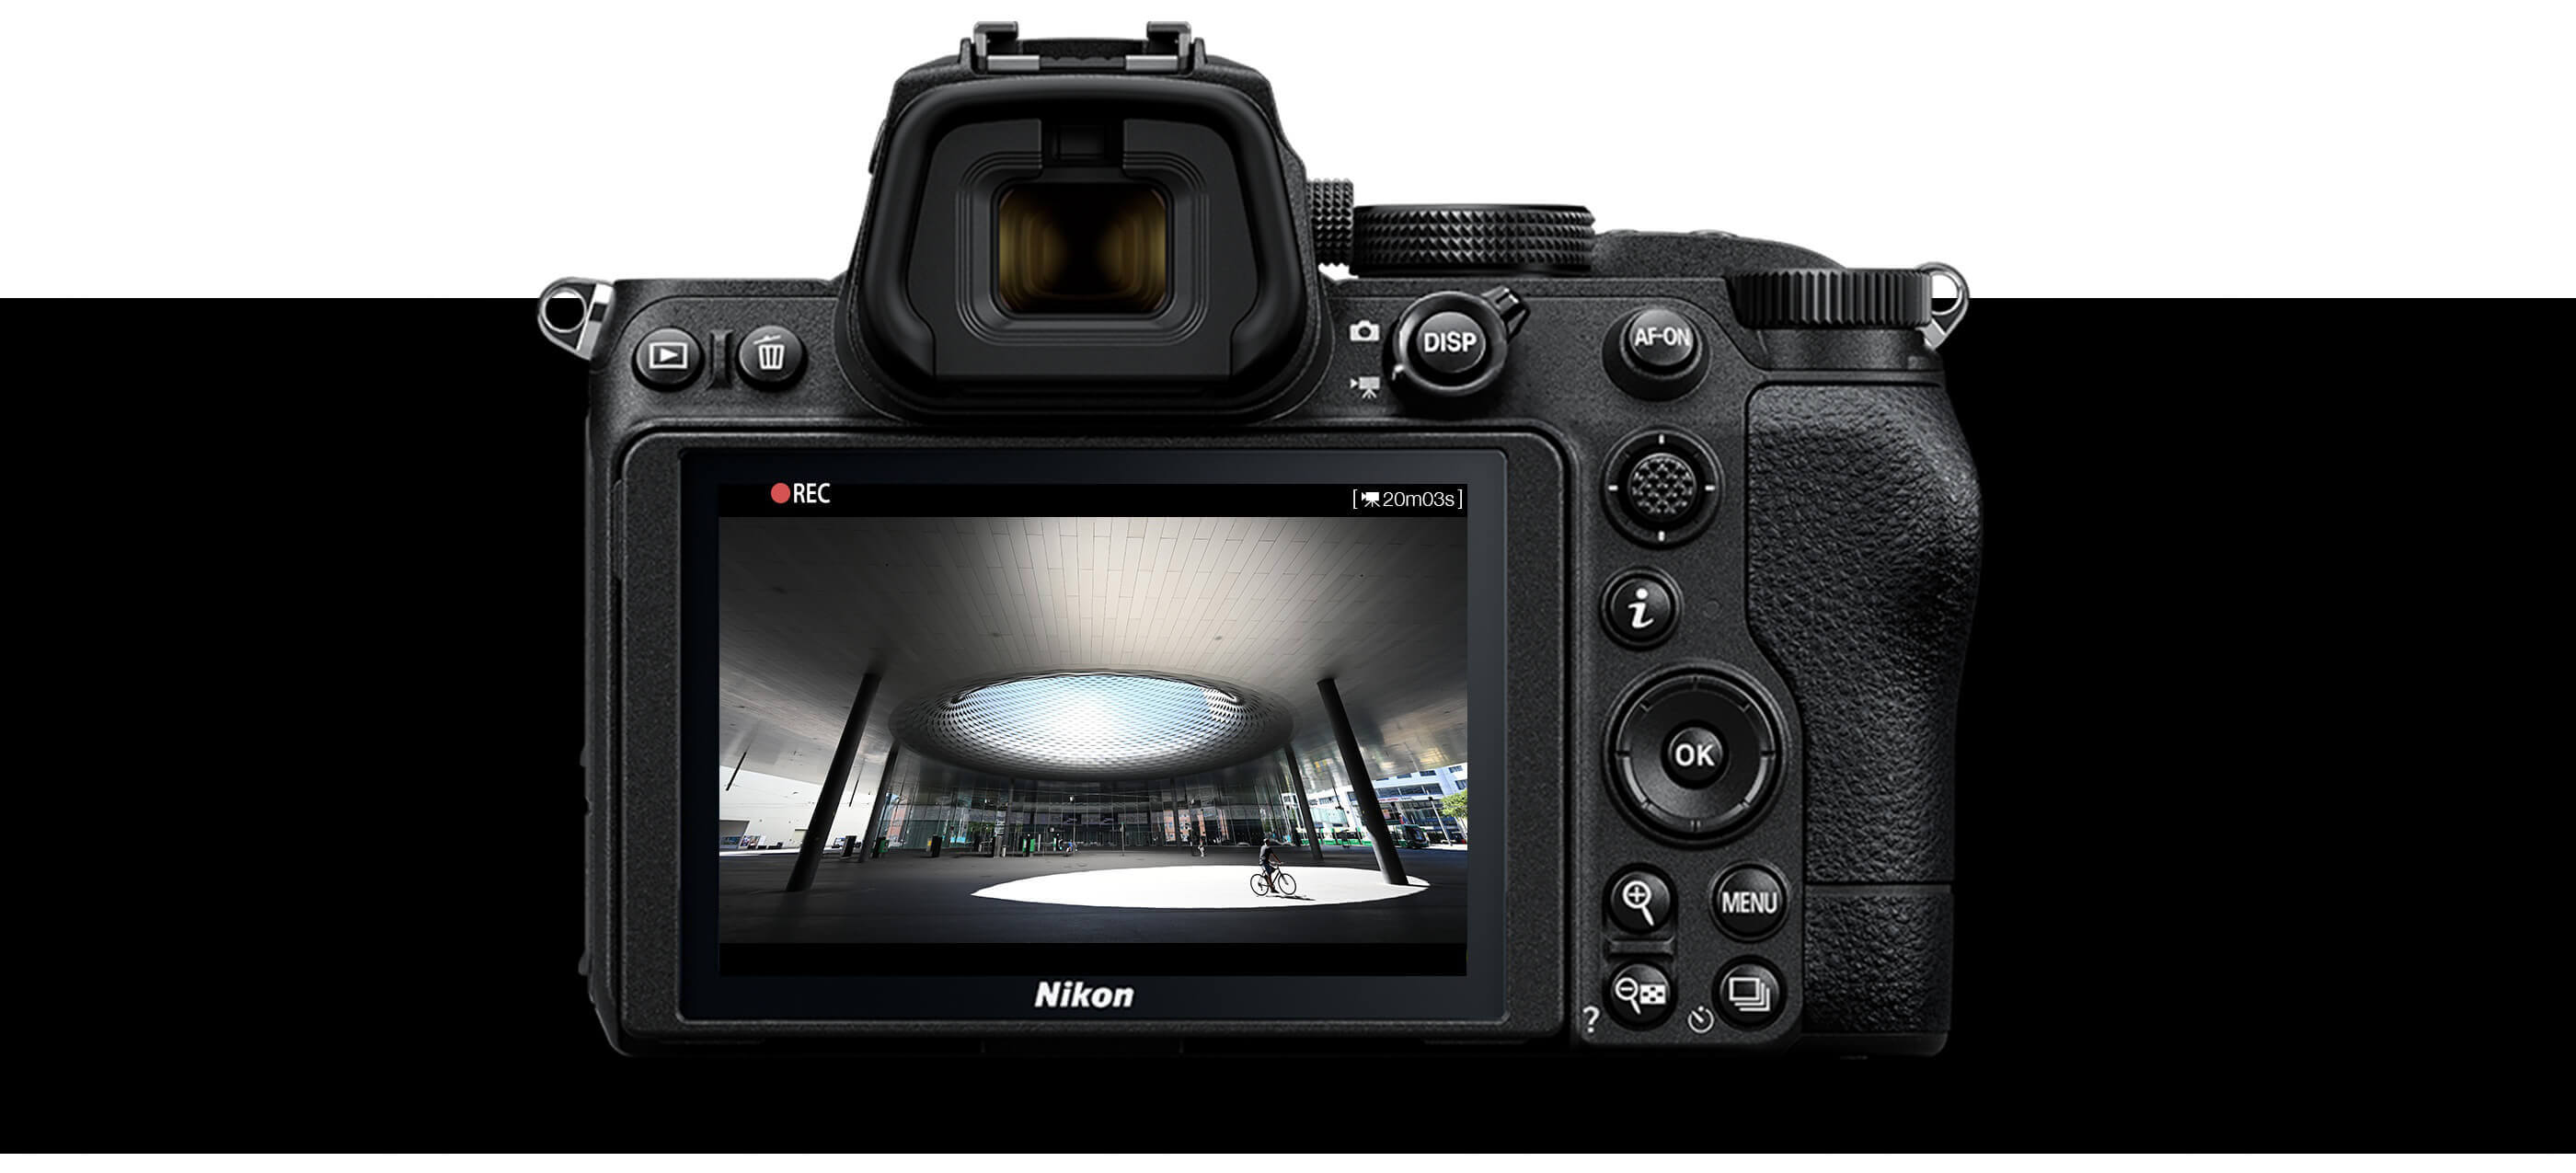 photo of the back of a Z camera and on the LCD is a wide-angle interior view, taken with the NIKKOR Z 14-24mm f/2.8 S lens